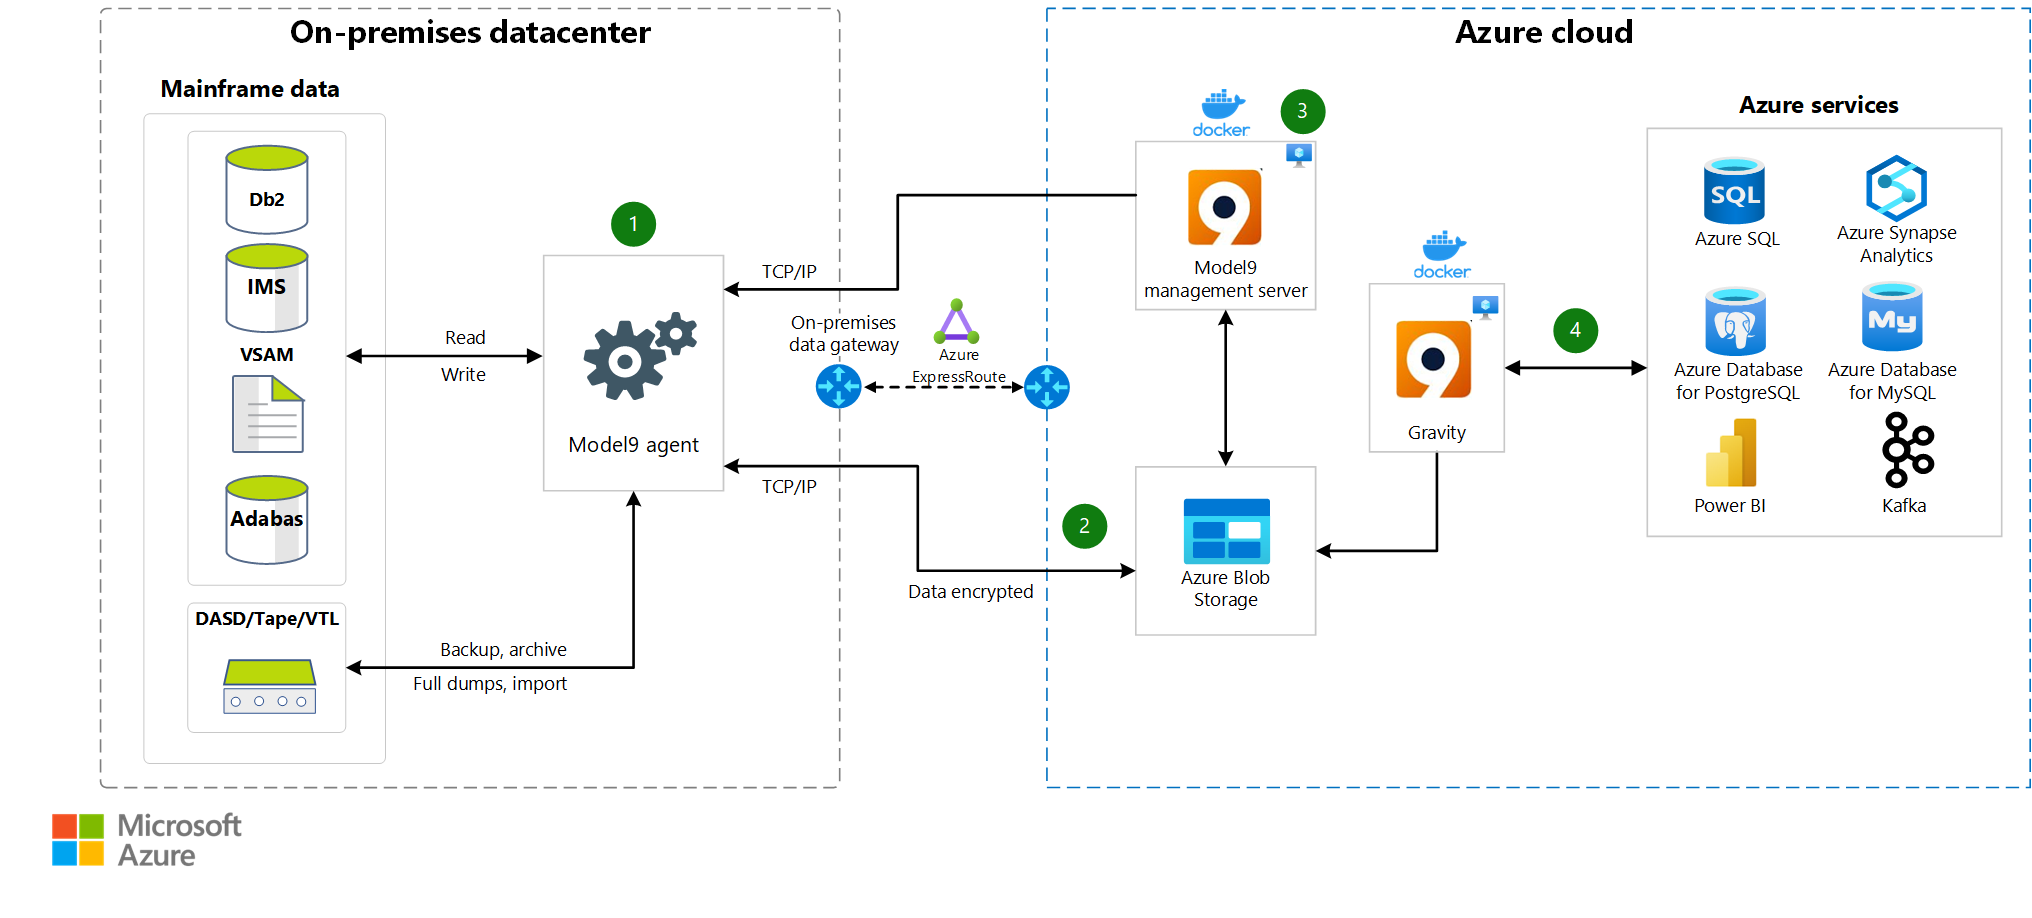 Screenshot that shows the Azure architecture to migrate mainframe data to the cloud.